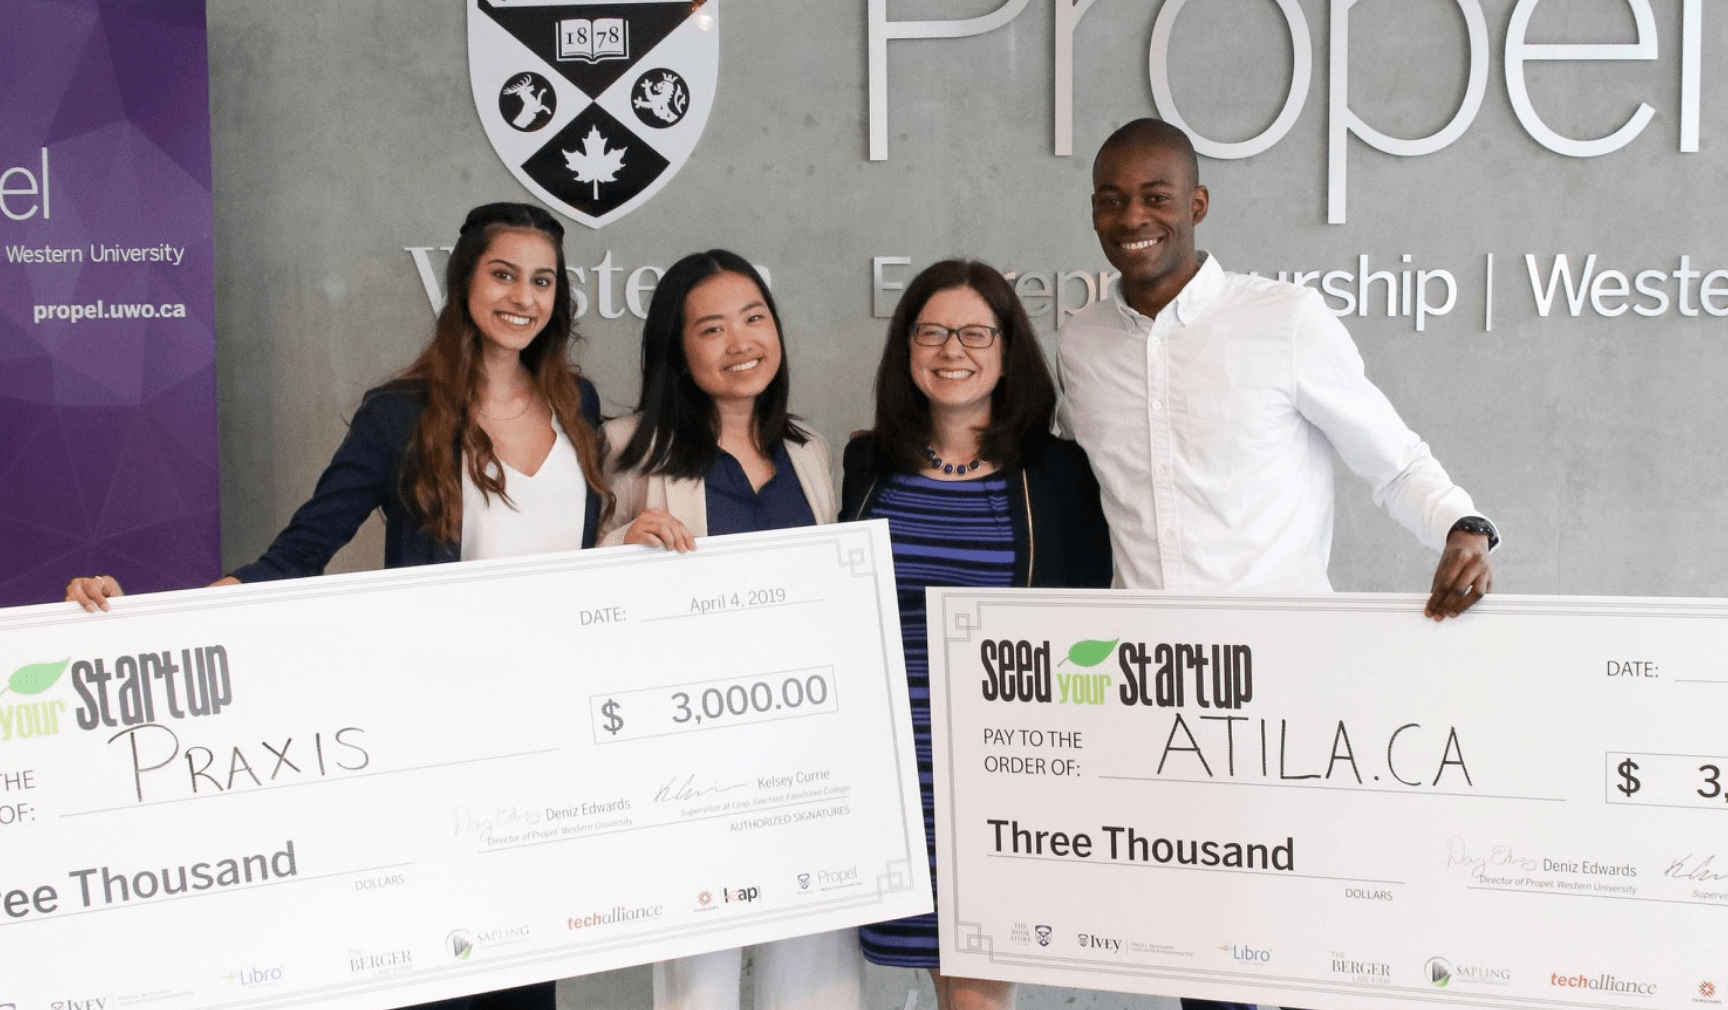 Four people holding up large cheques from Propel Seed Your Startup